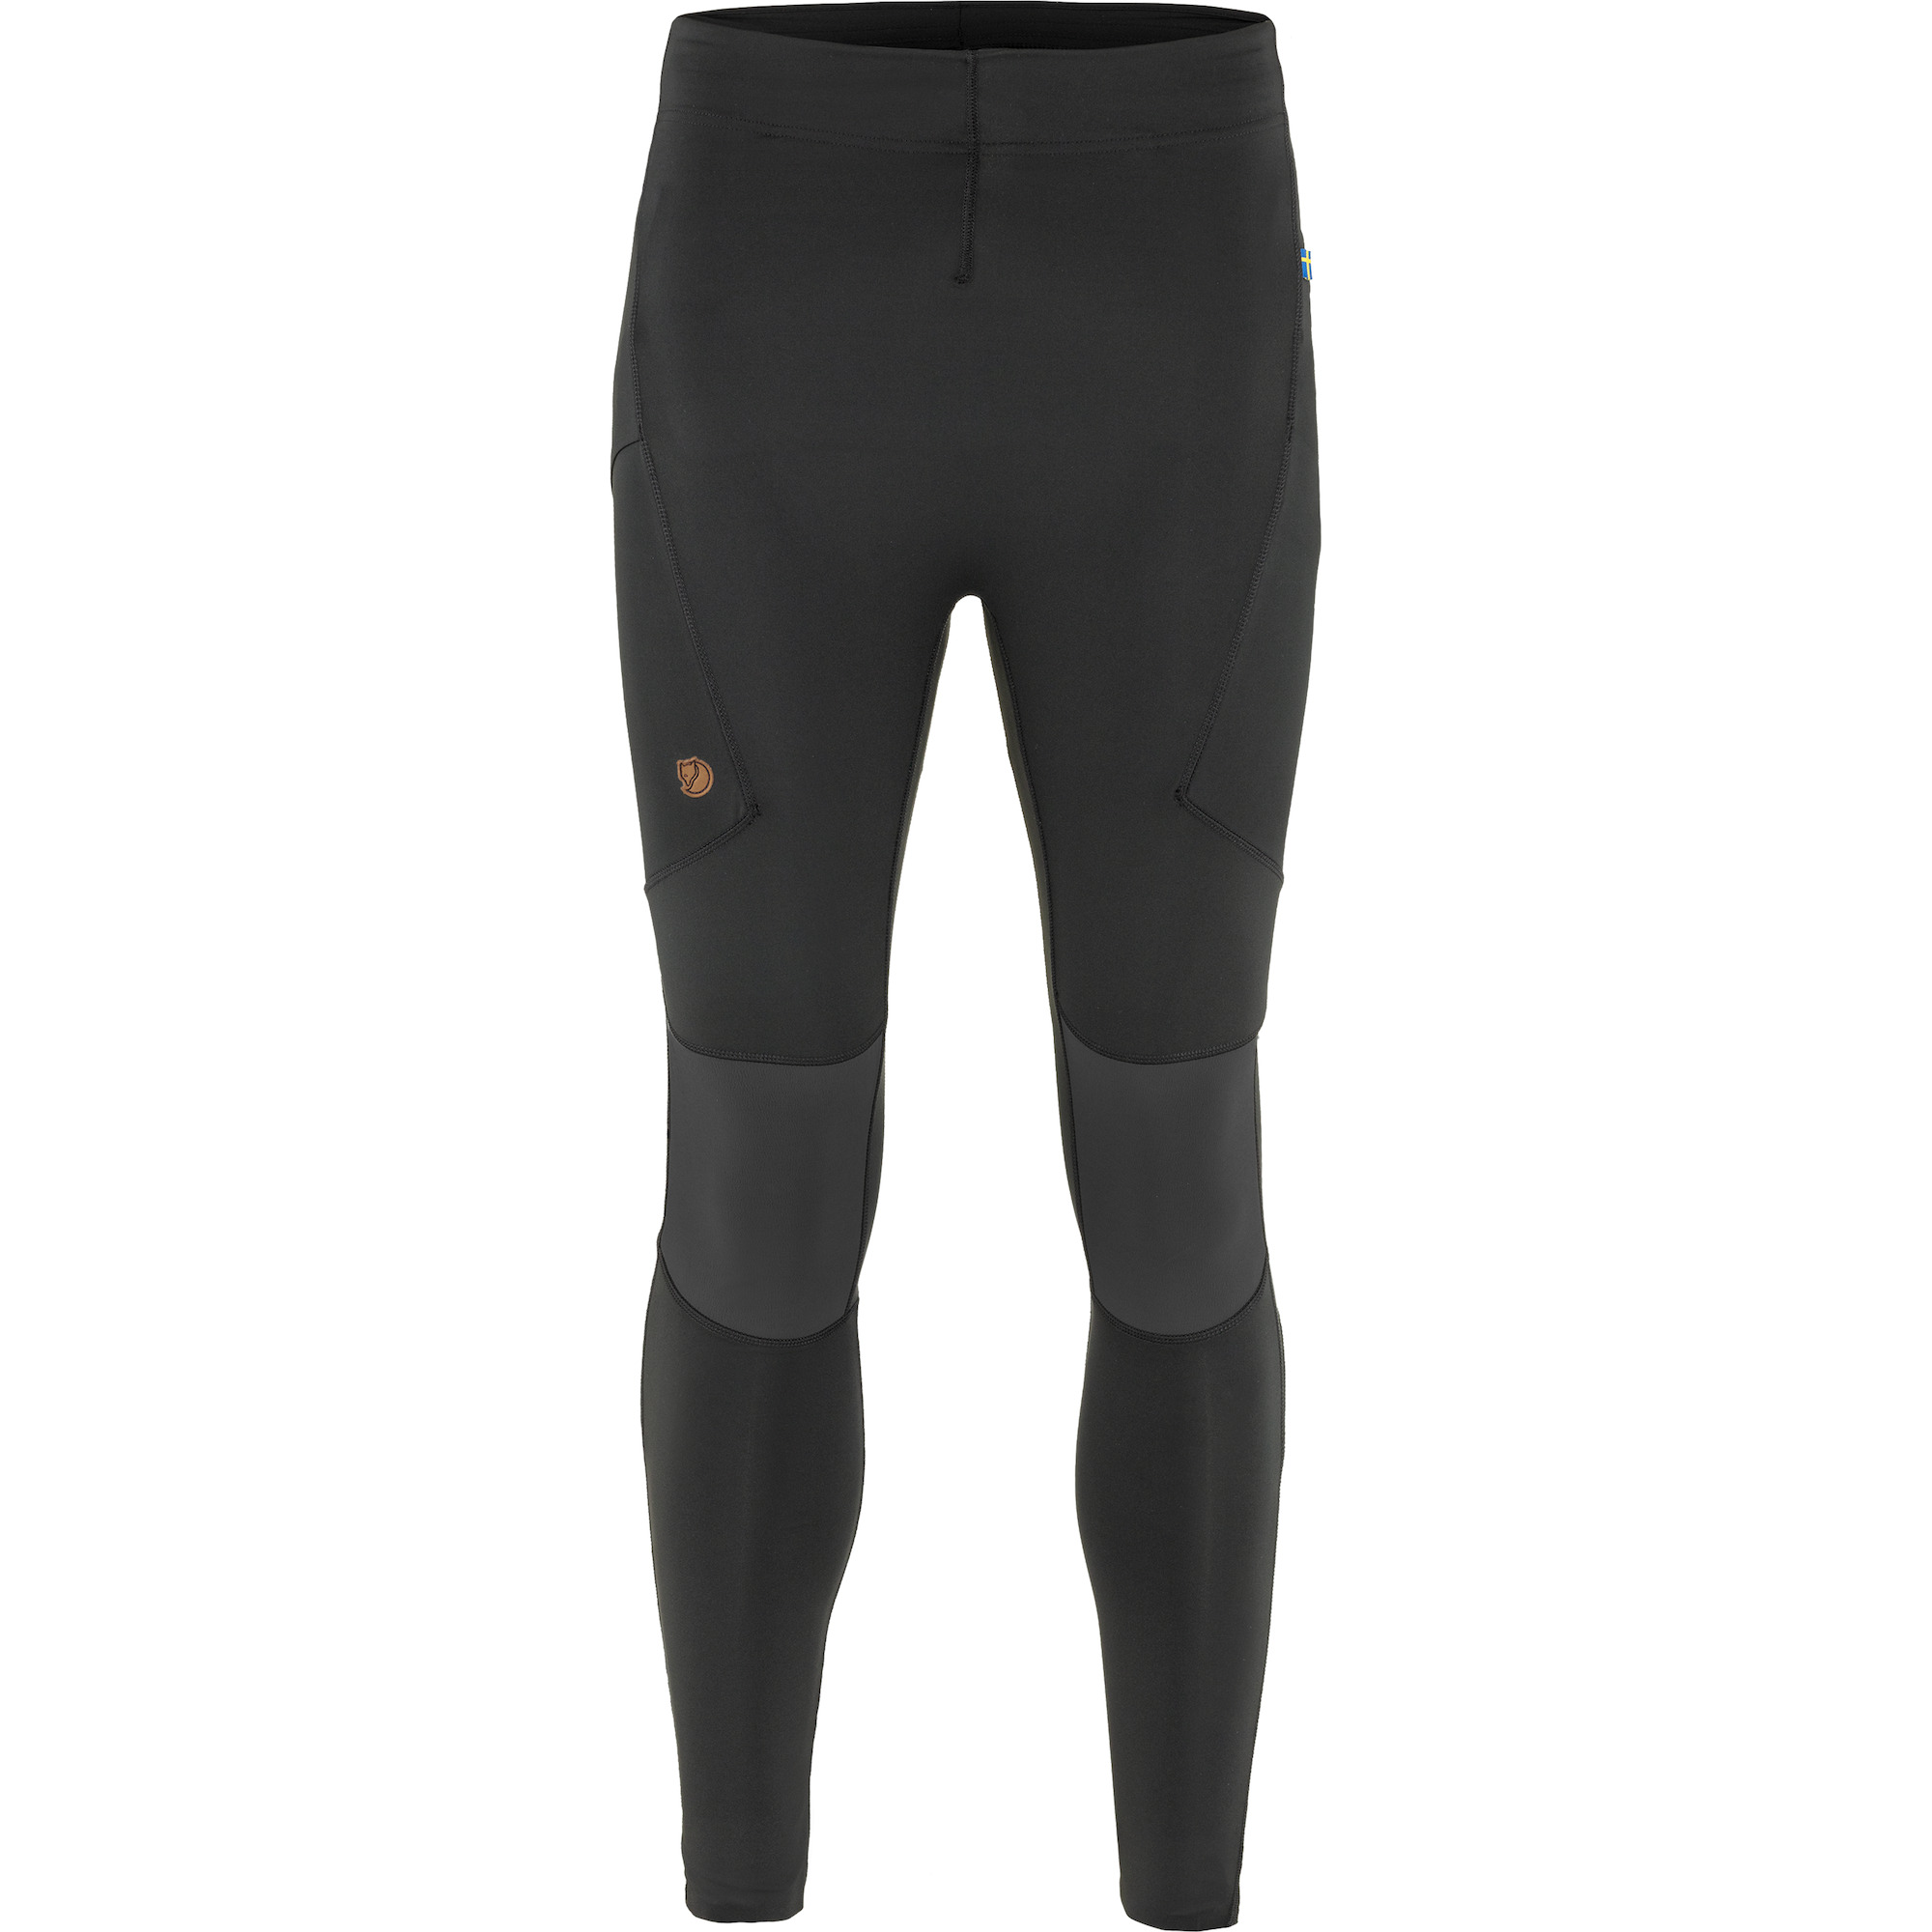 Discover our Trekking Tights